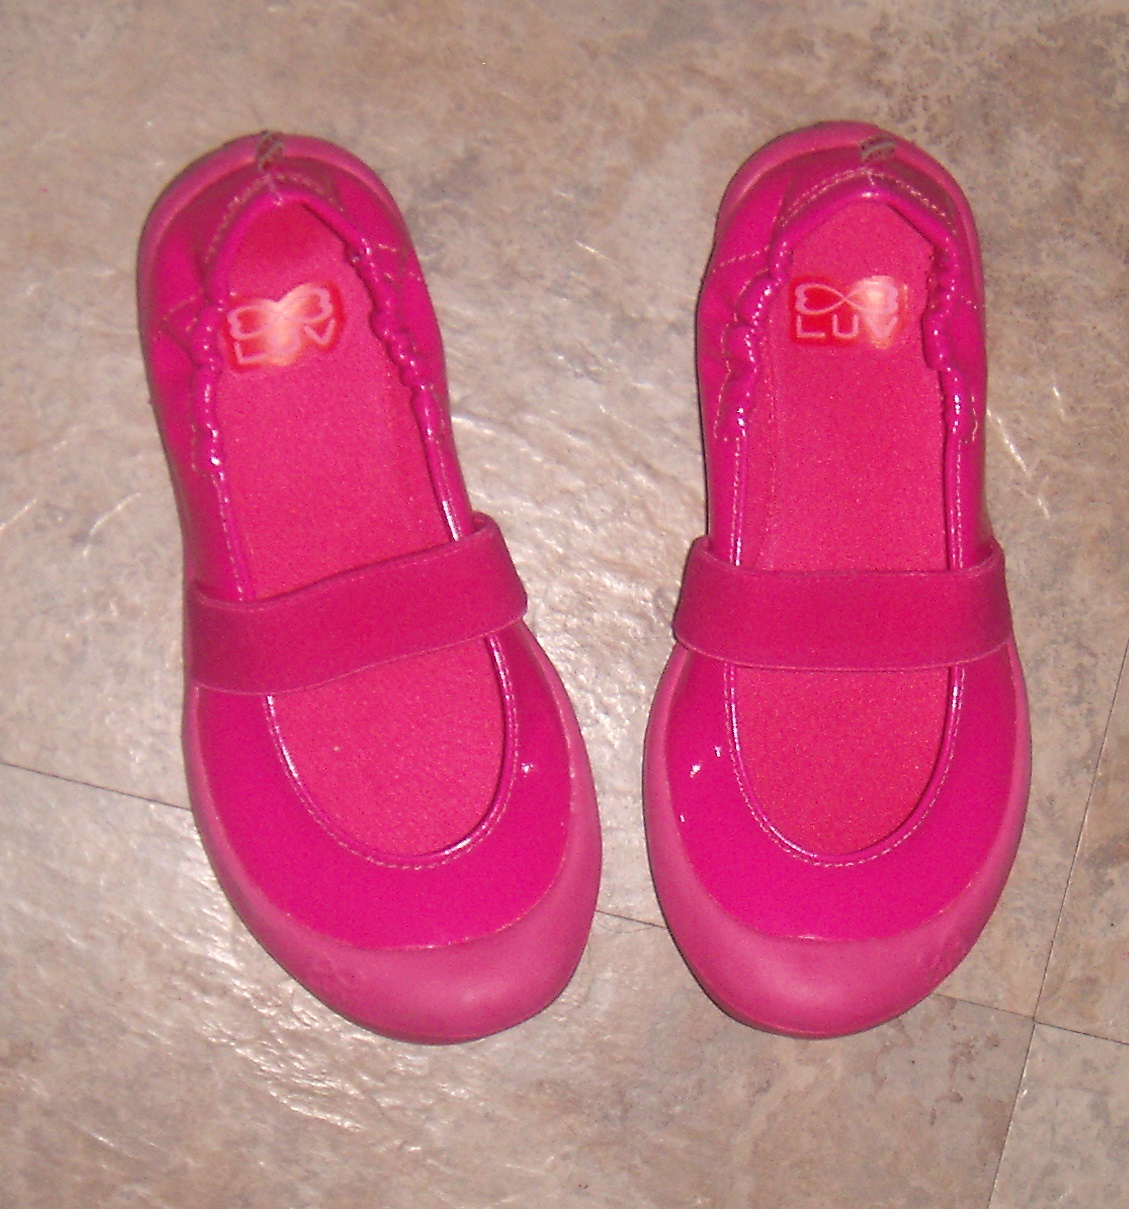 Mommie of 2: Luv Footwear Review and #Giveaway 8/5 CLOSED